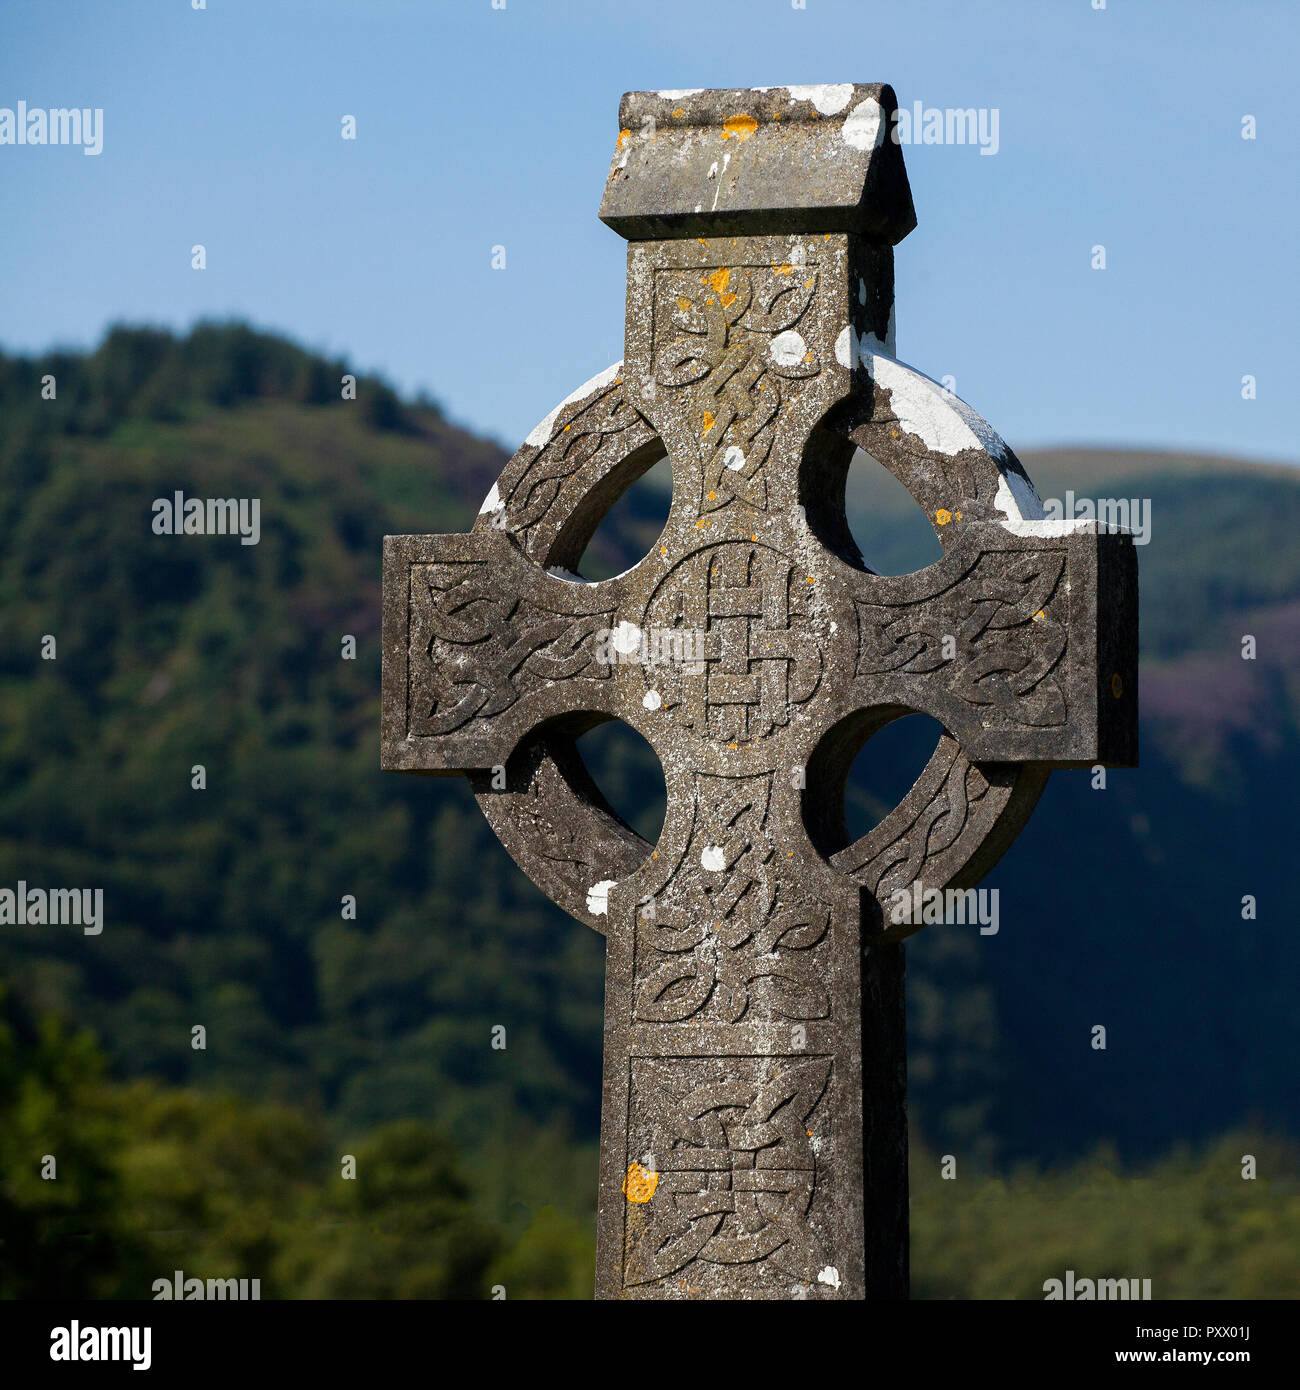 A carved, stone celtic cross in Ireland, with green hills and a blue sky behind. Moss is growing on the stonework which is old. Stock Photo